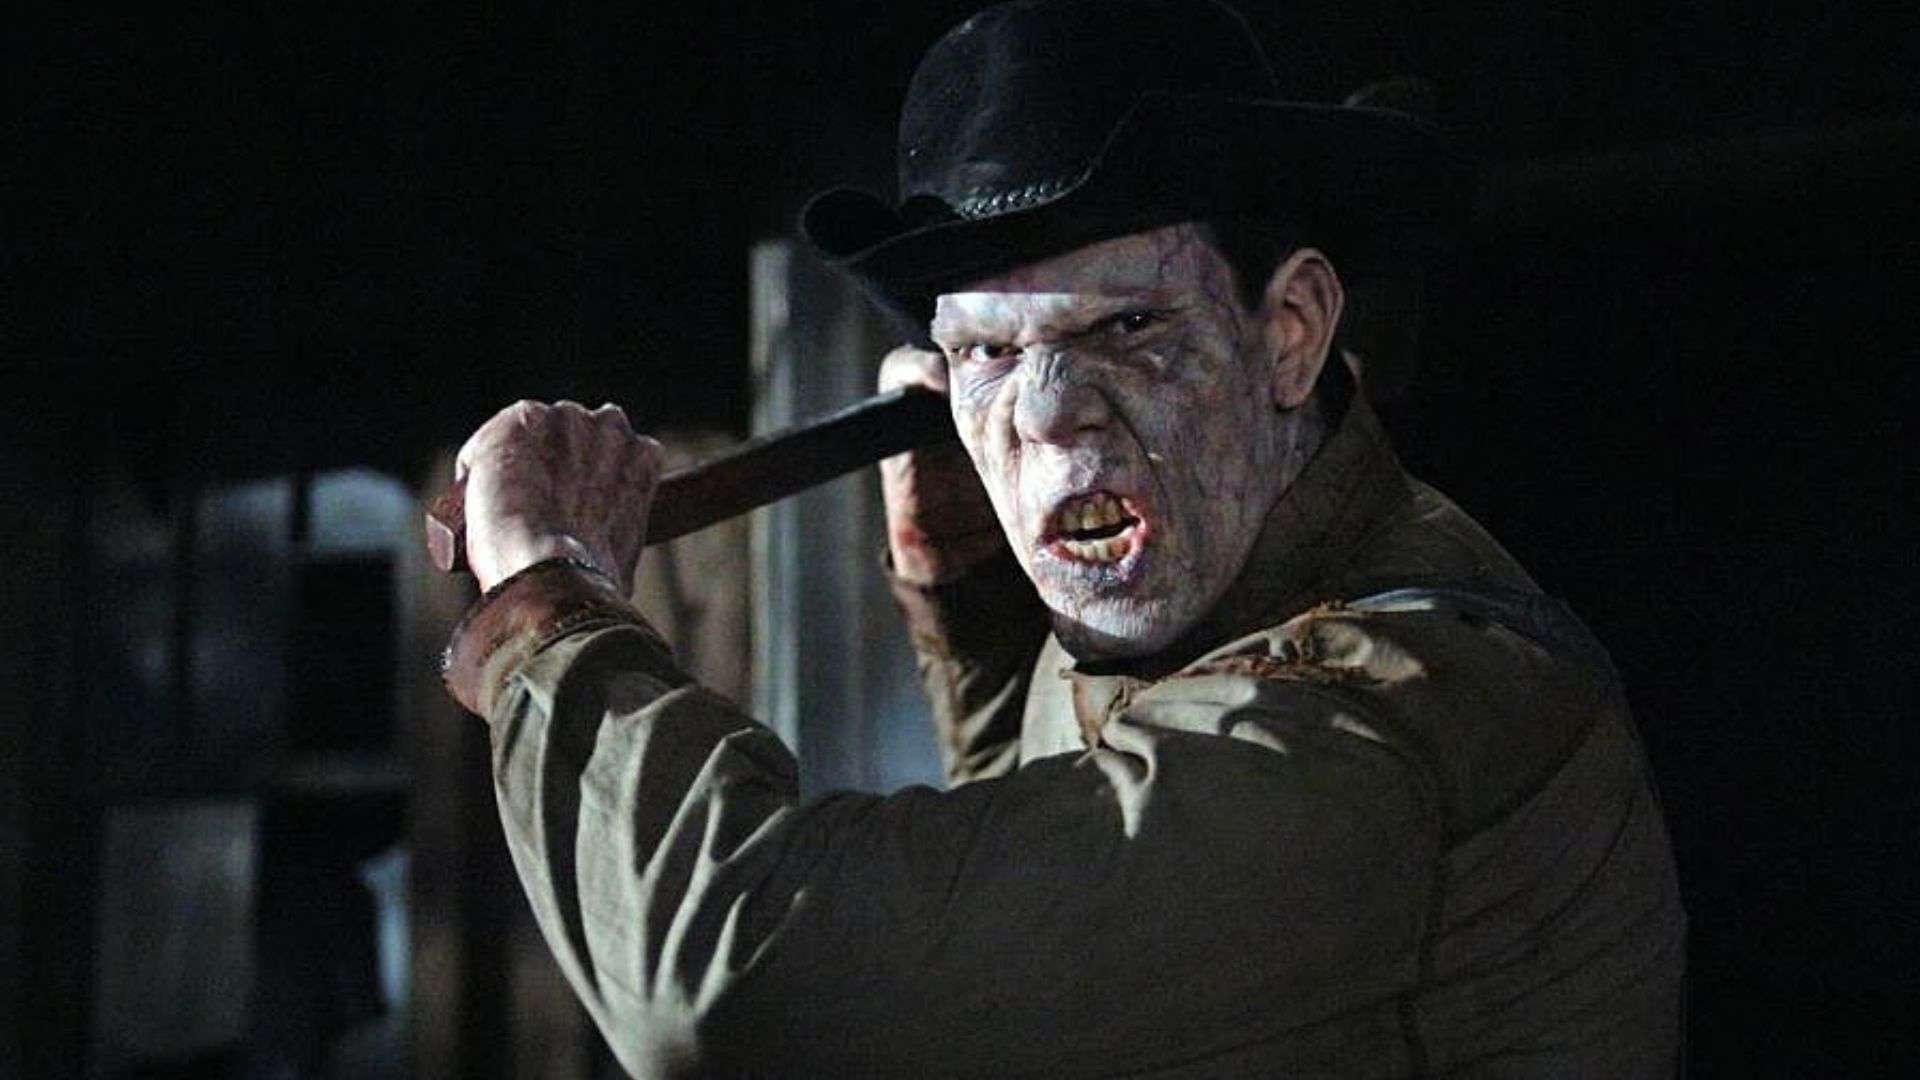 A man in a black hat wielding a hatchet in this image from Warner Bros. Television